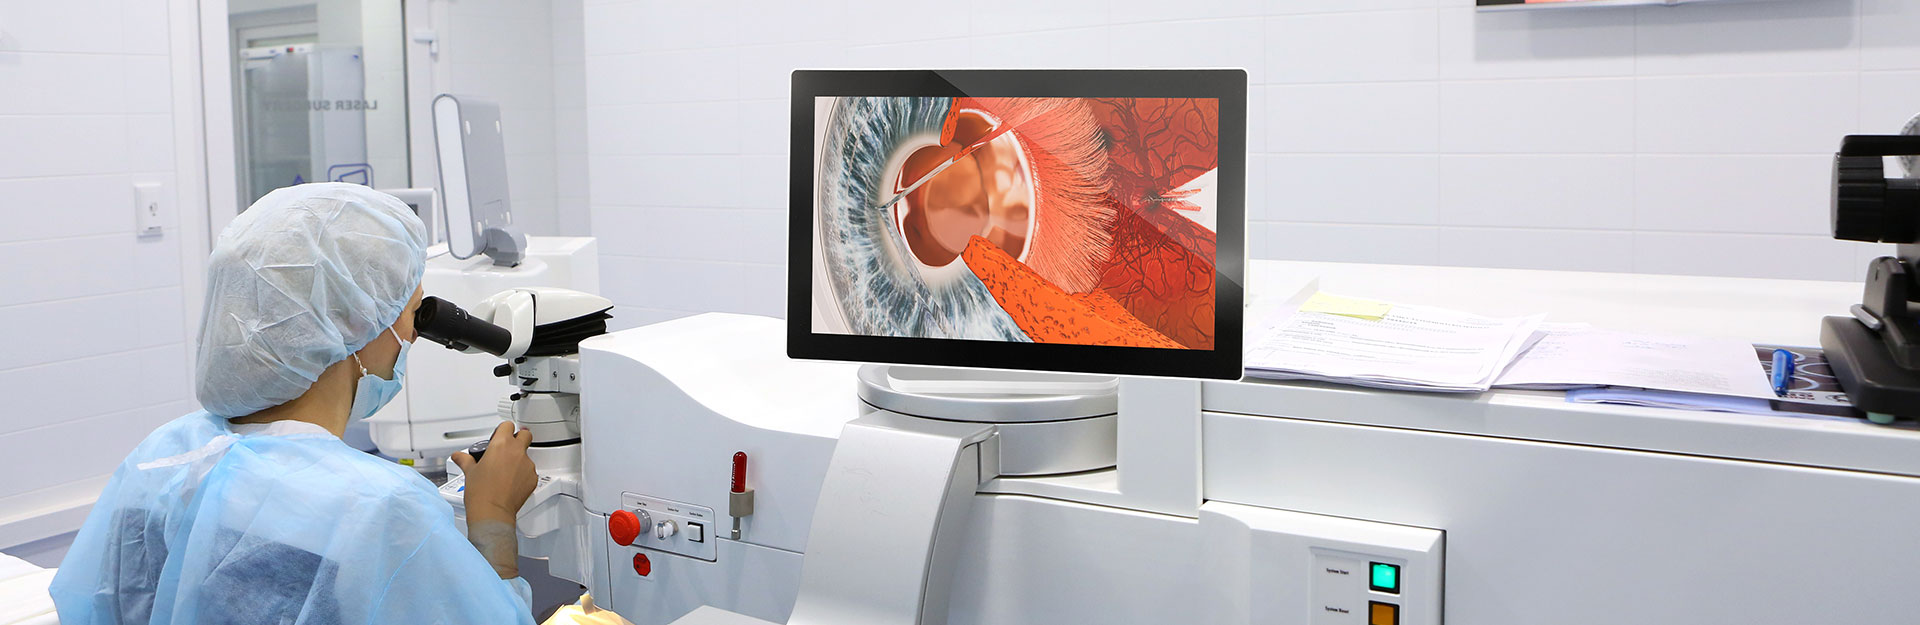 Displays / Monitors in Applications: Ophthalmology